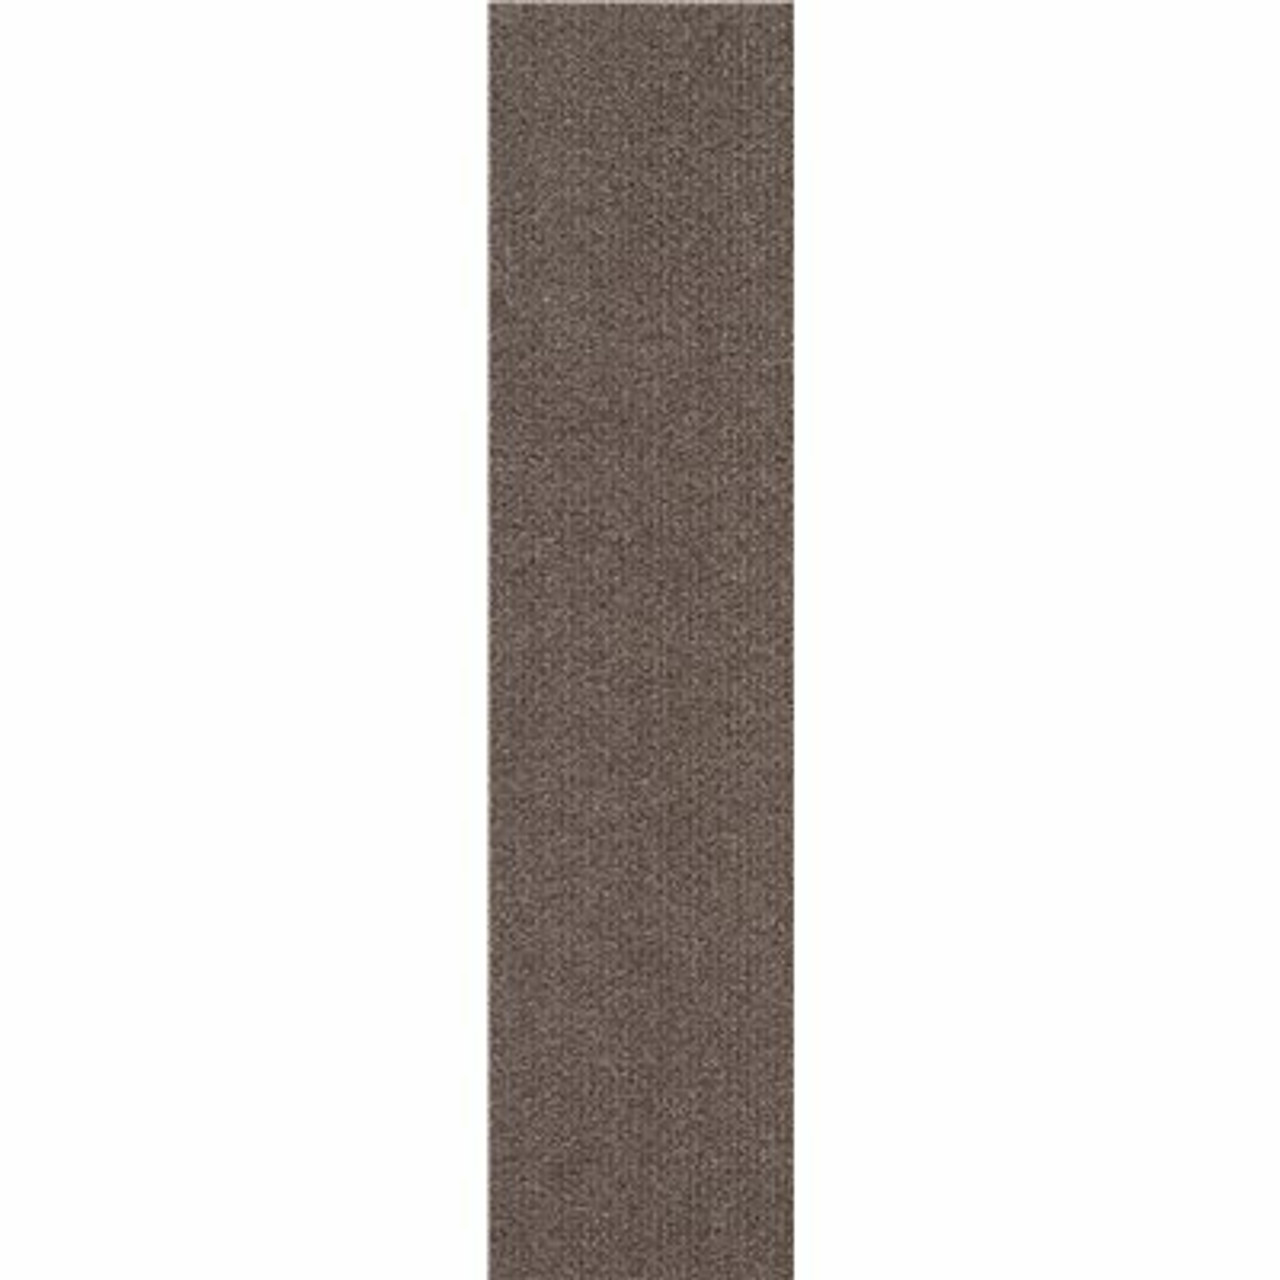 Foss Peel And Stick Espresso High Low Planks 9 In. X 36 In. Commercial/Residential Carpet (16-Tile / Case)